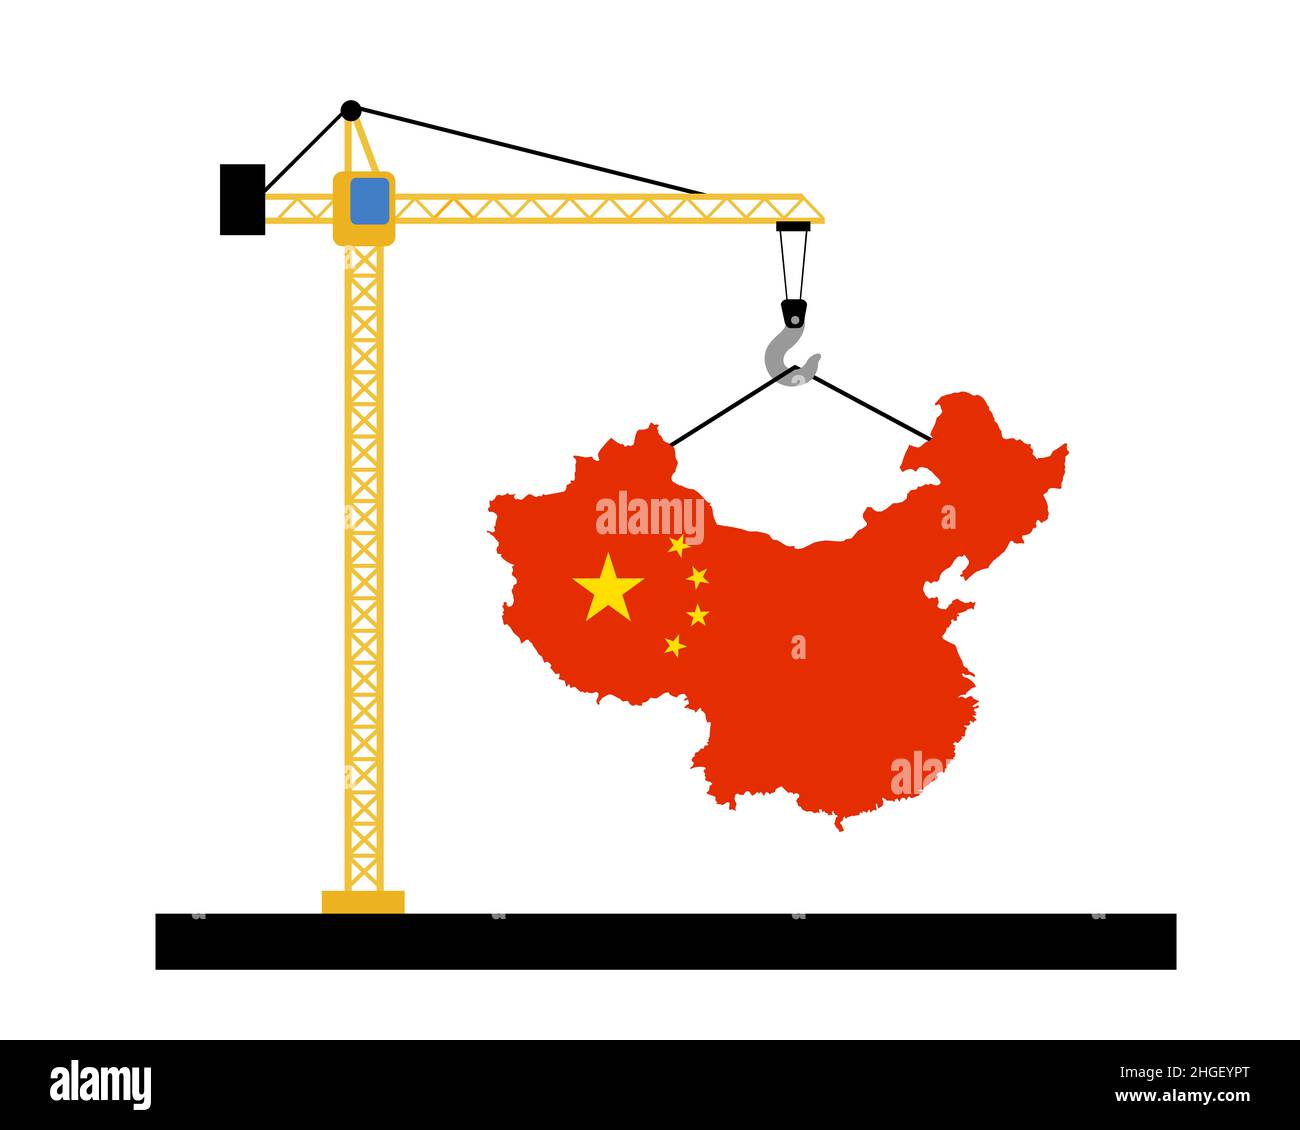 China as emerging and developing country and state. Boom of construction investment and development as metaphor of prosperity, progression, modernizat Stock Photo